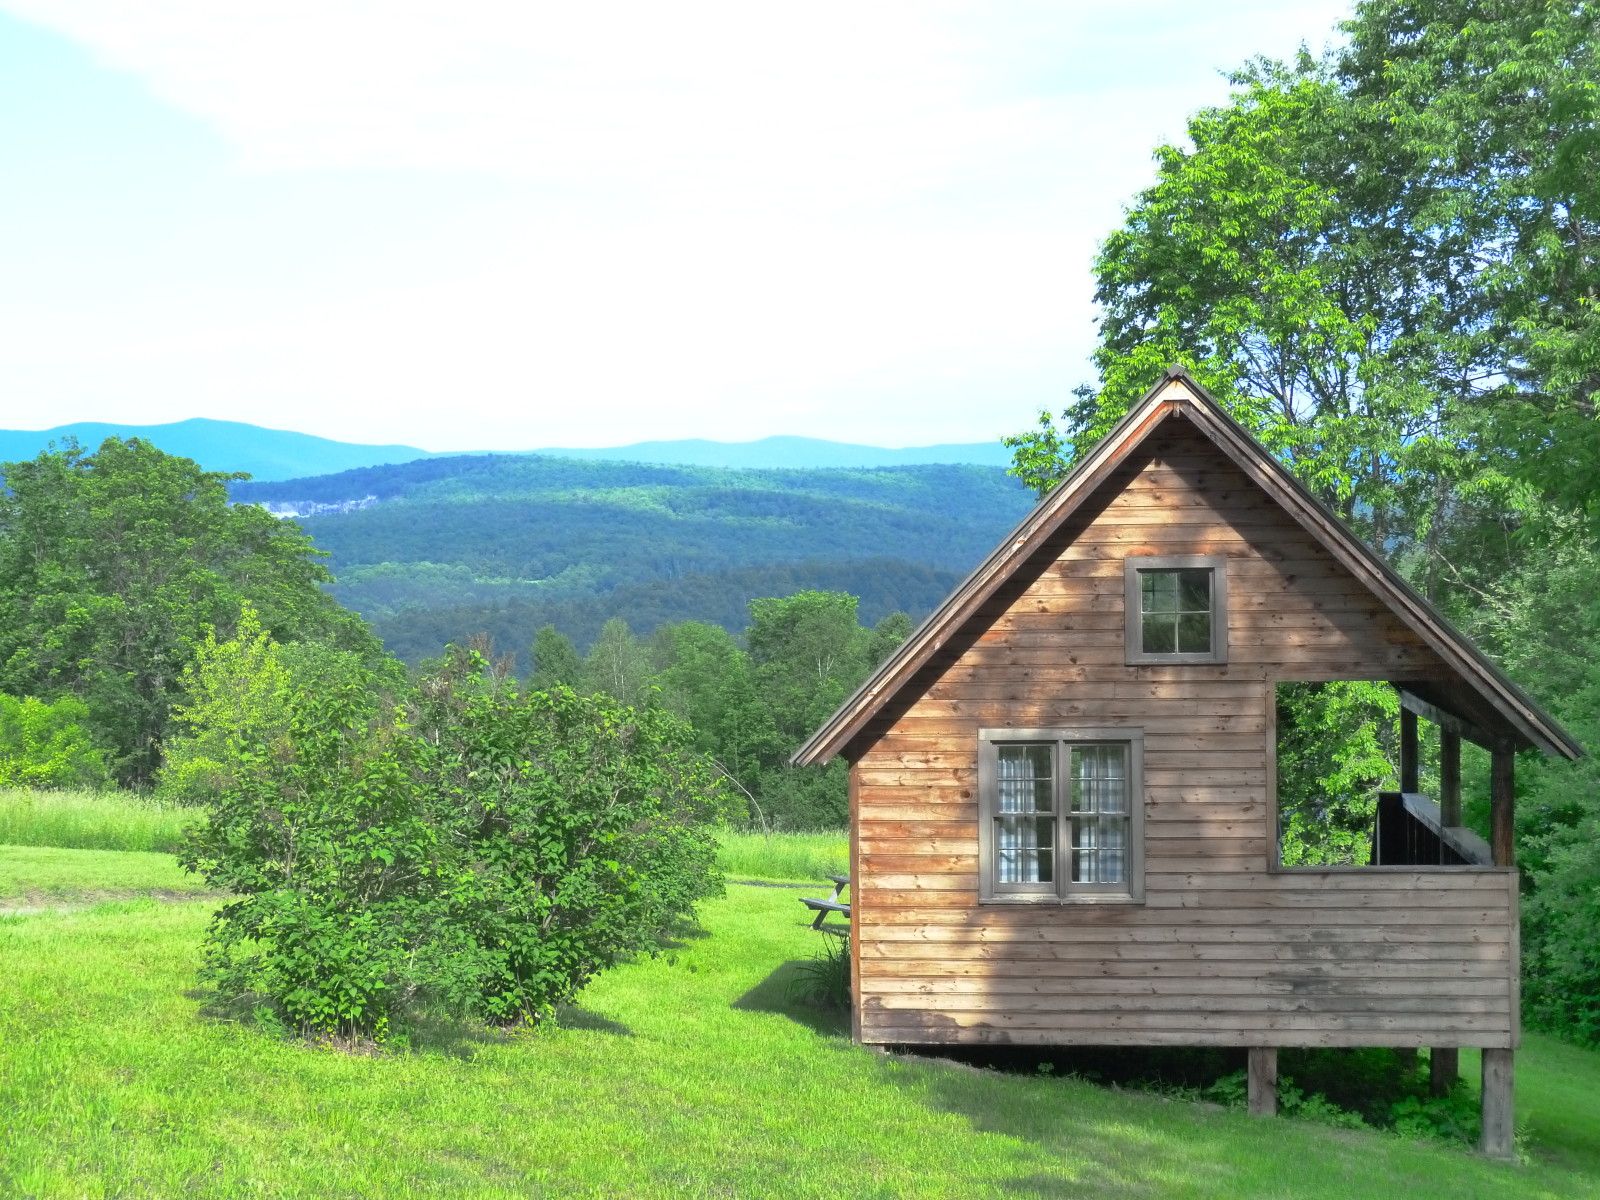 Mountain View Cabin | Learning centers, Cabin and Farming